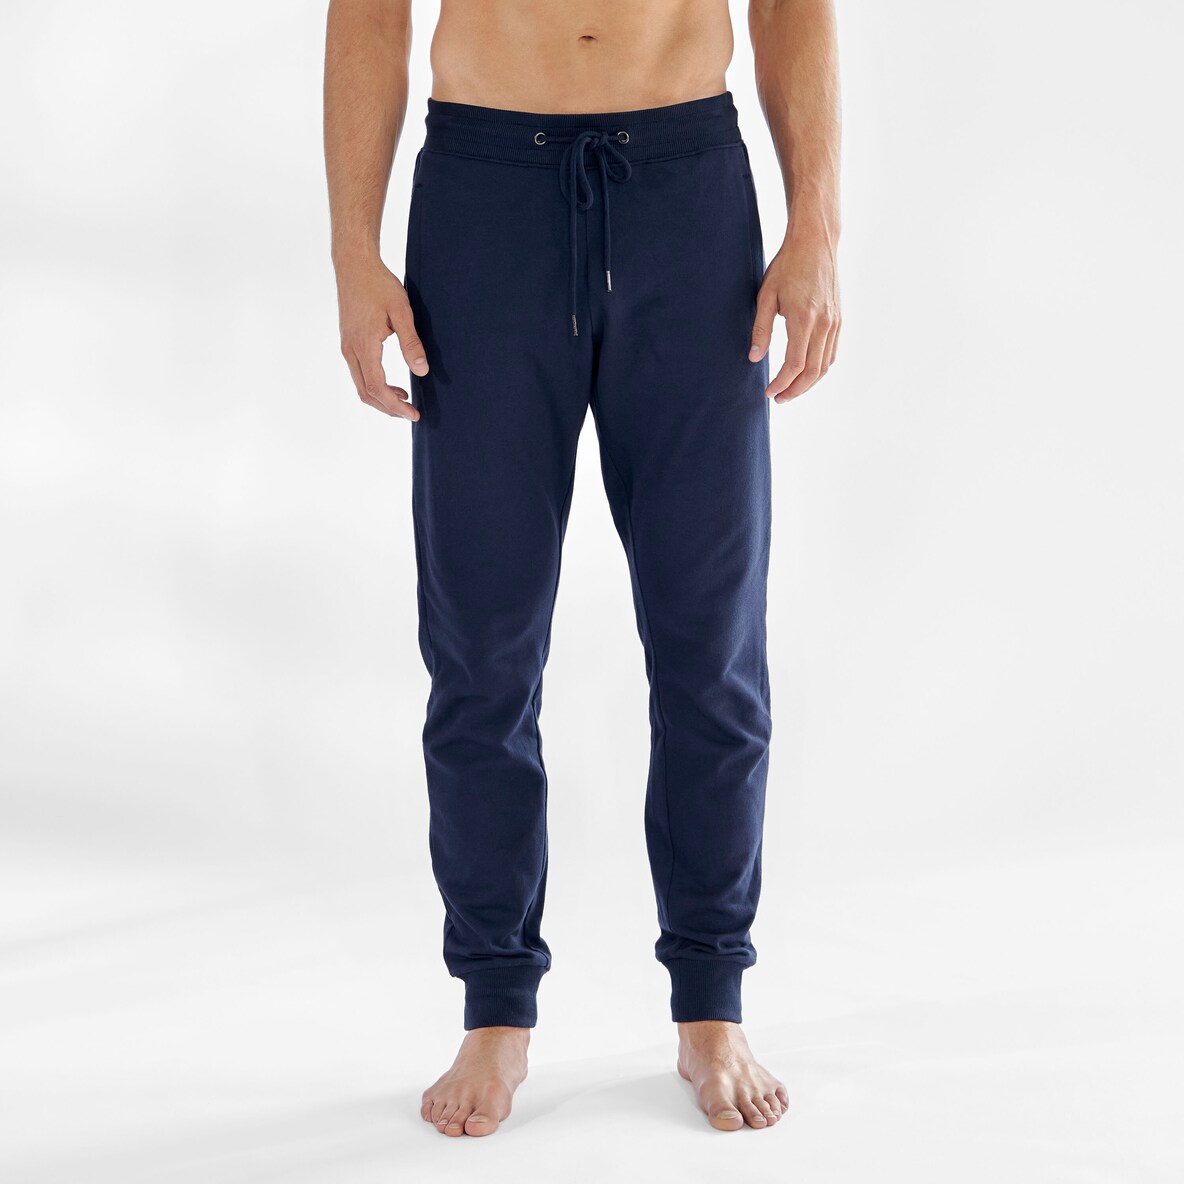 Loungewear in comfortable cotton for men - Bread & Boxers - Bread & Boxers